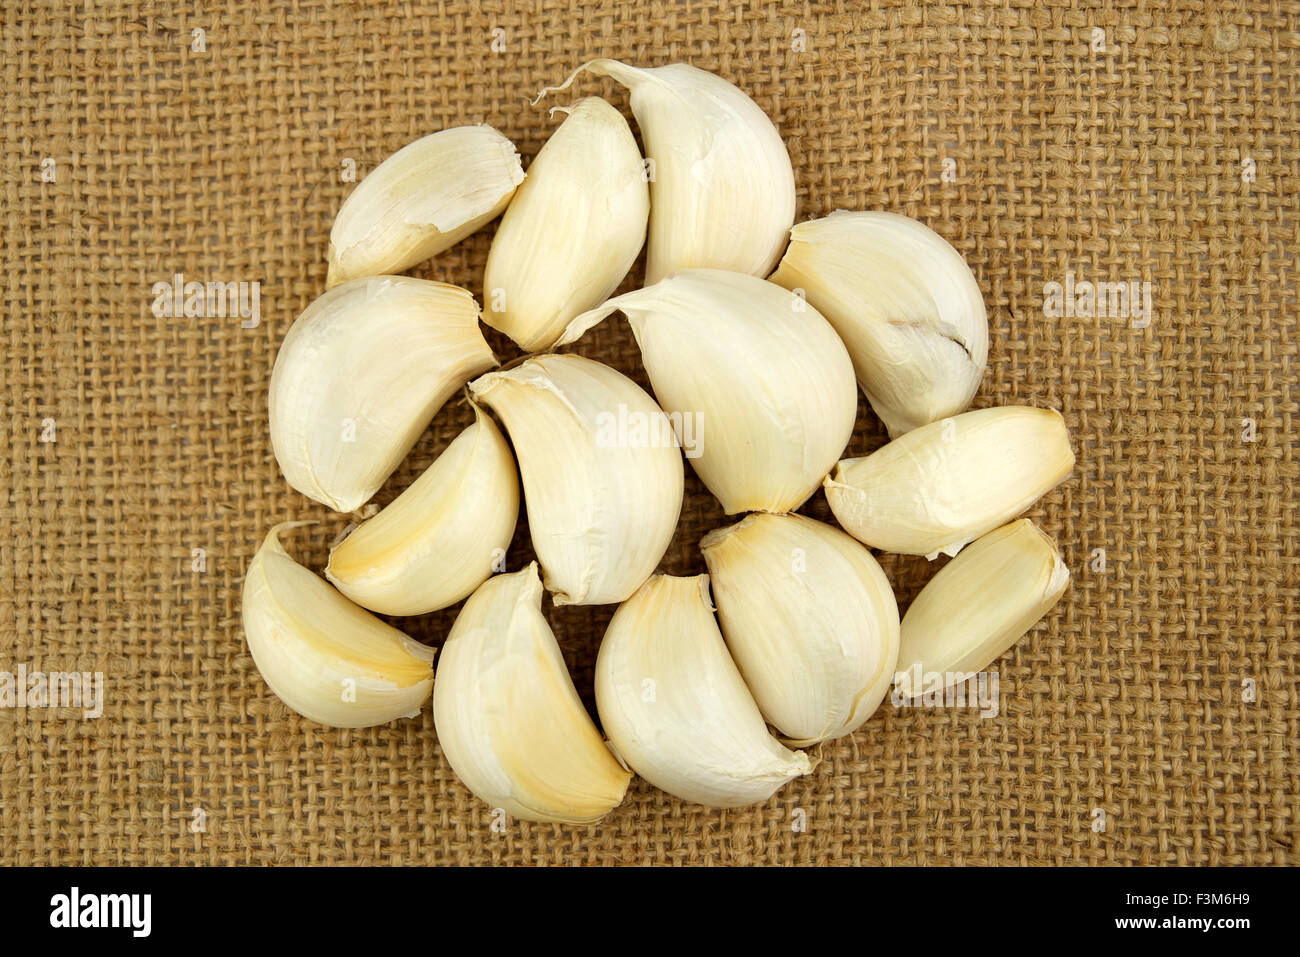 Pile of unshelled garlic cloves against a sack textured background Stock Photo